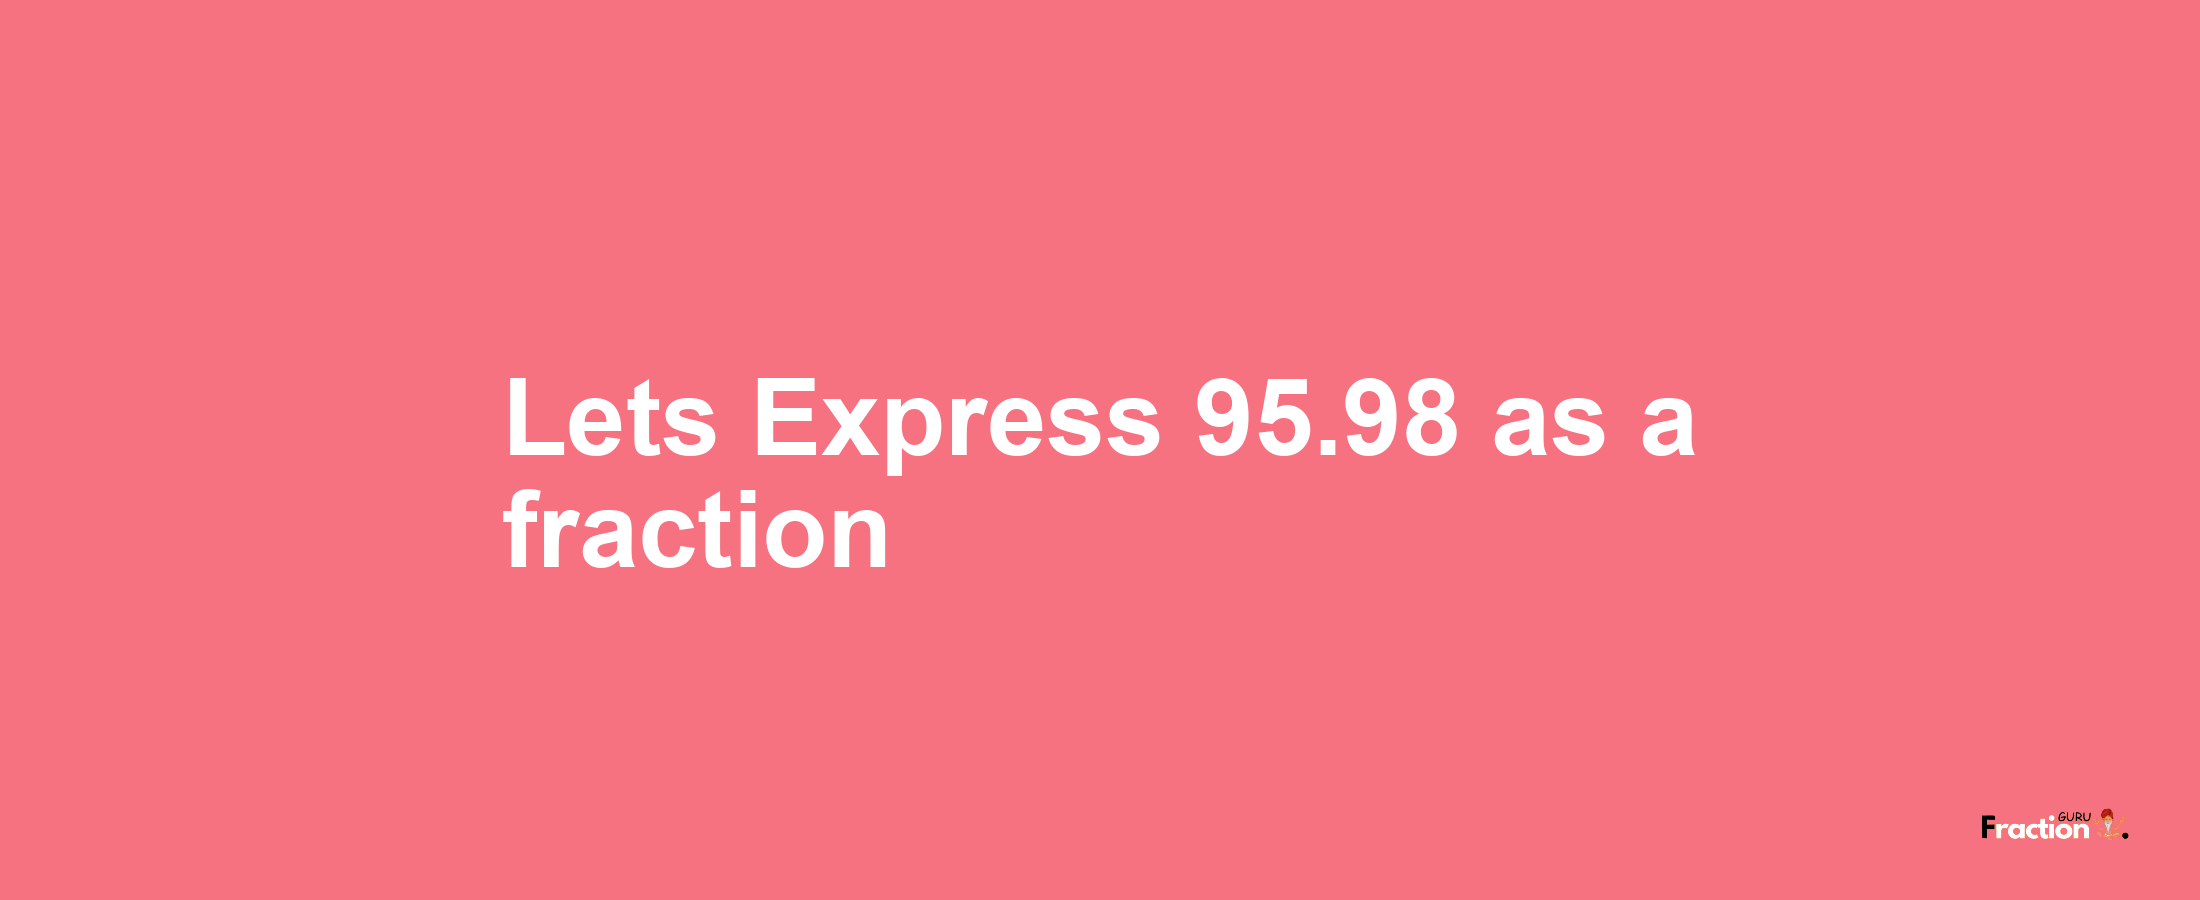 Lets Express 95.98 as afraction